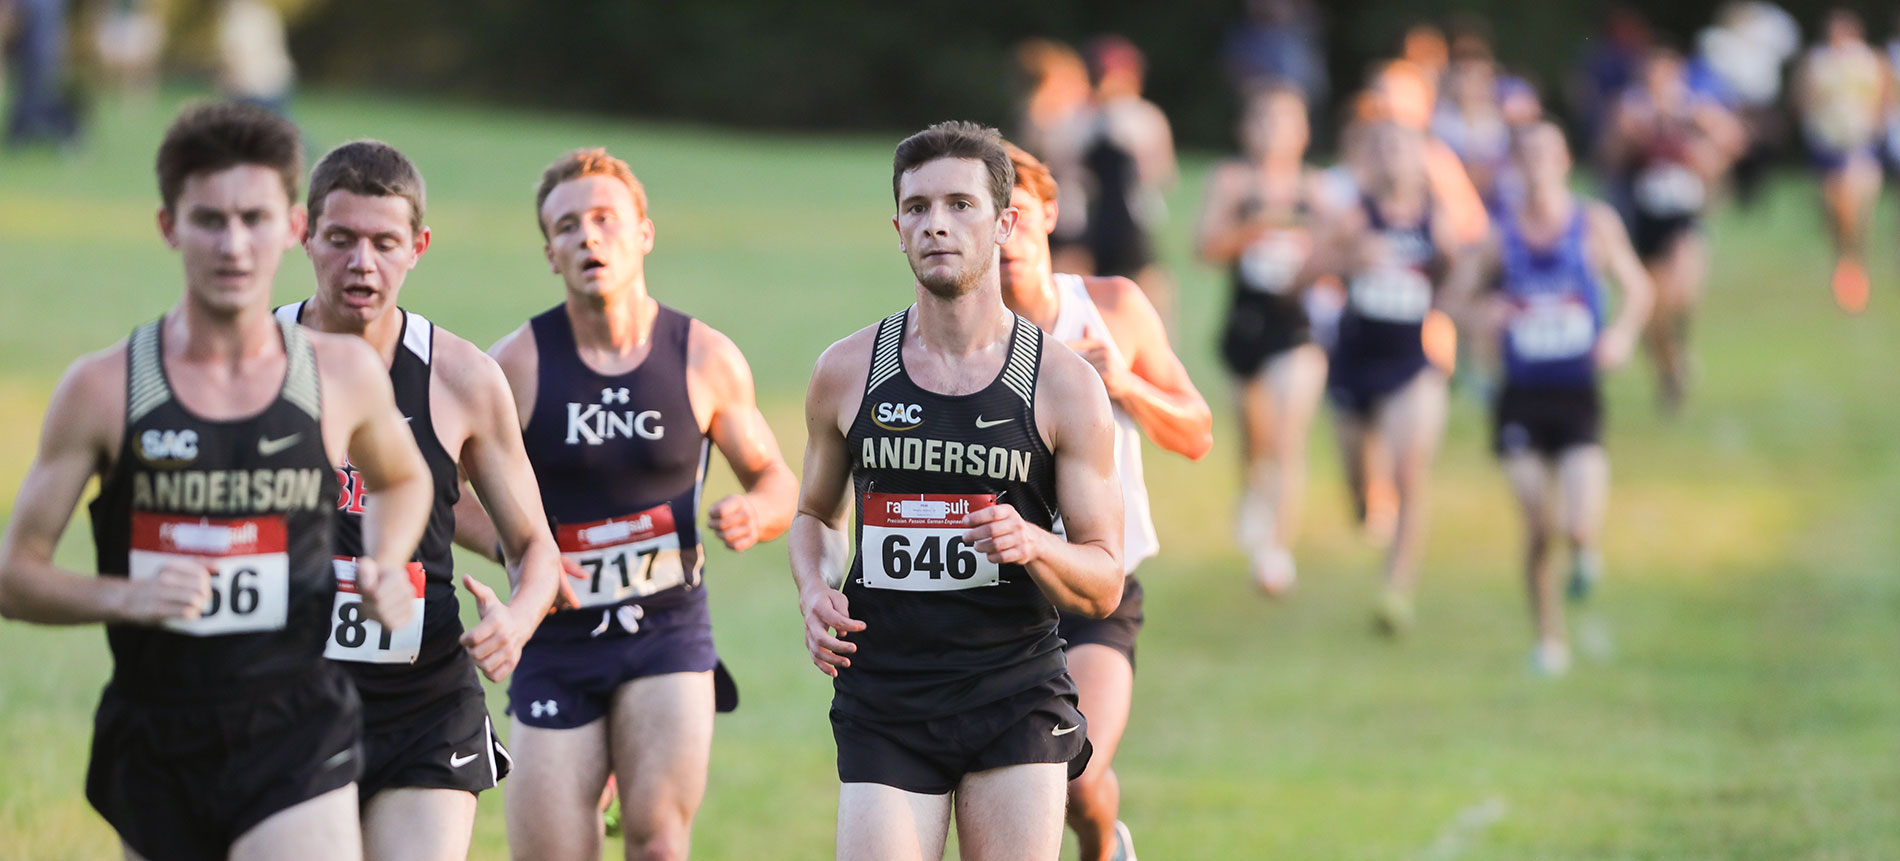 Men’s Cross Country Finishes 11th at Florida’s Mountain Dew Invitational